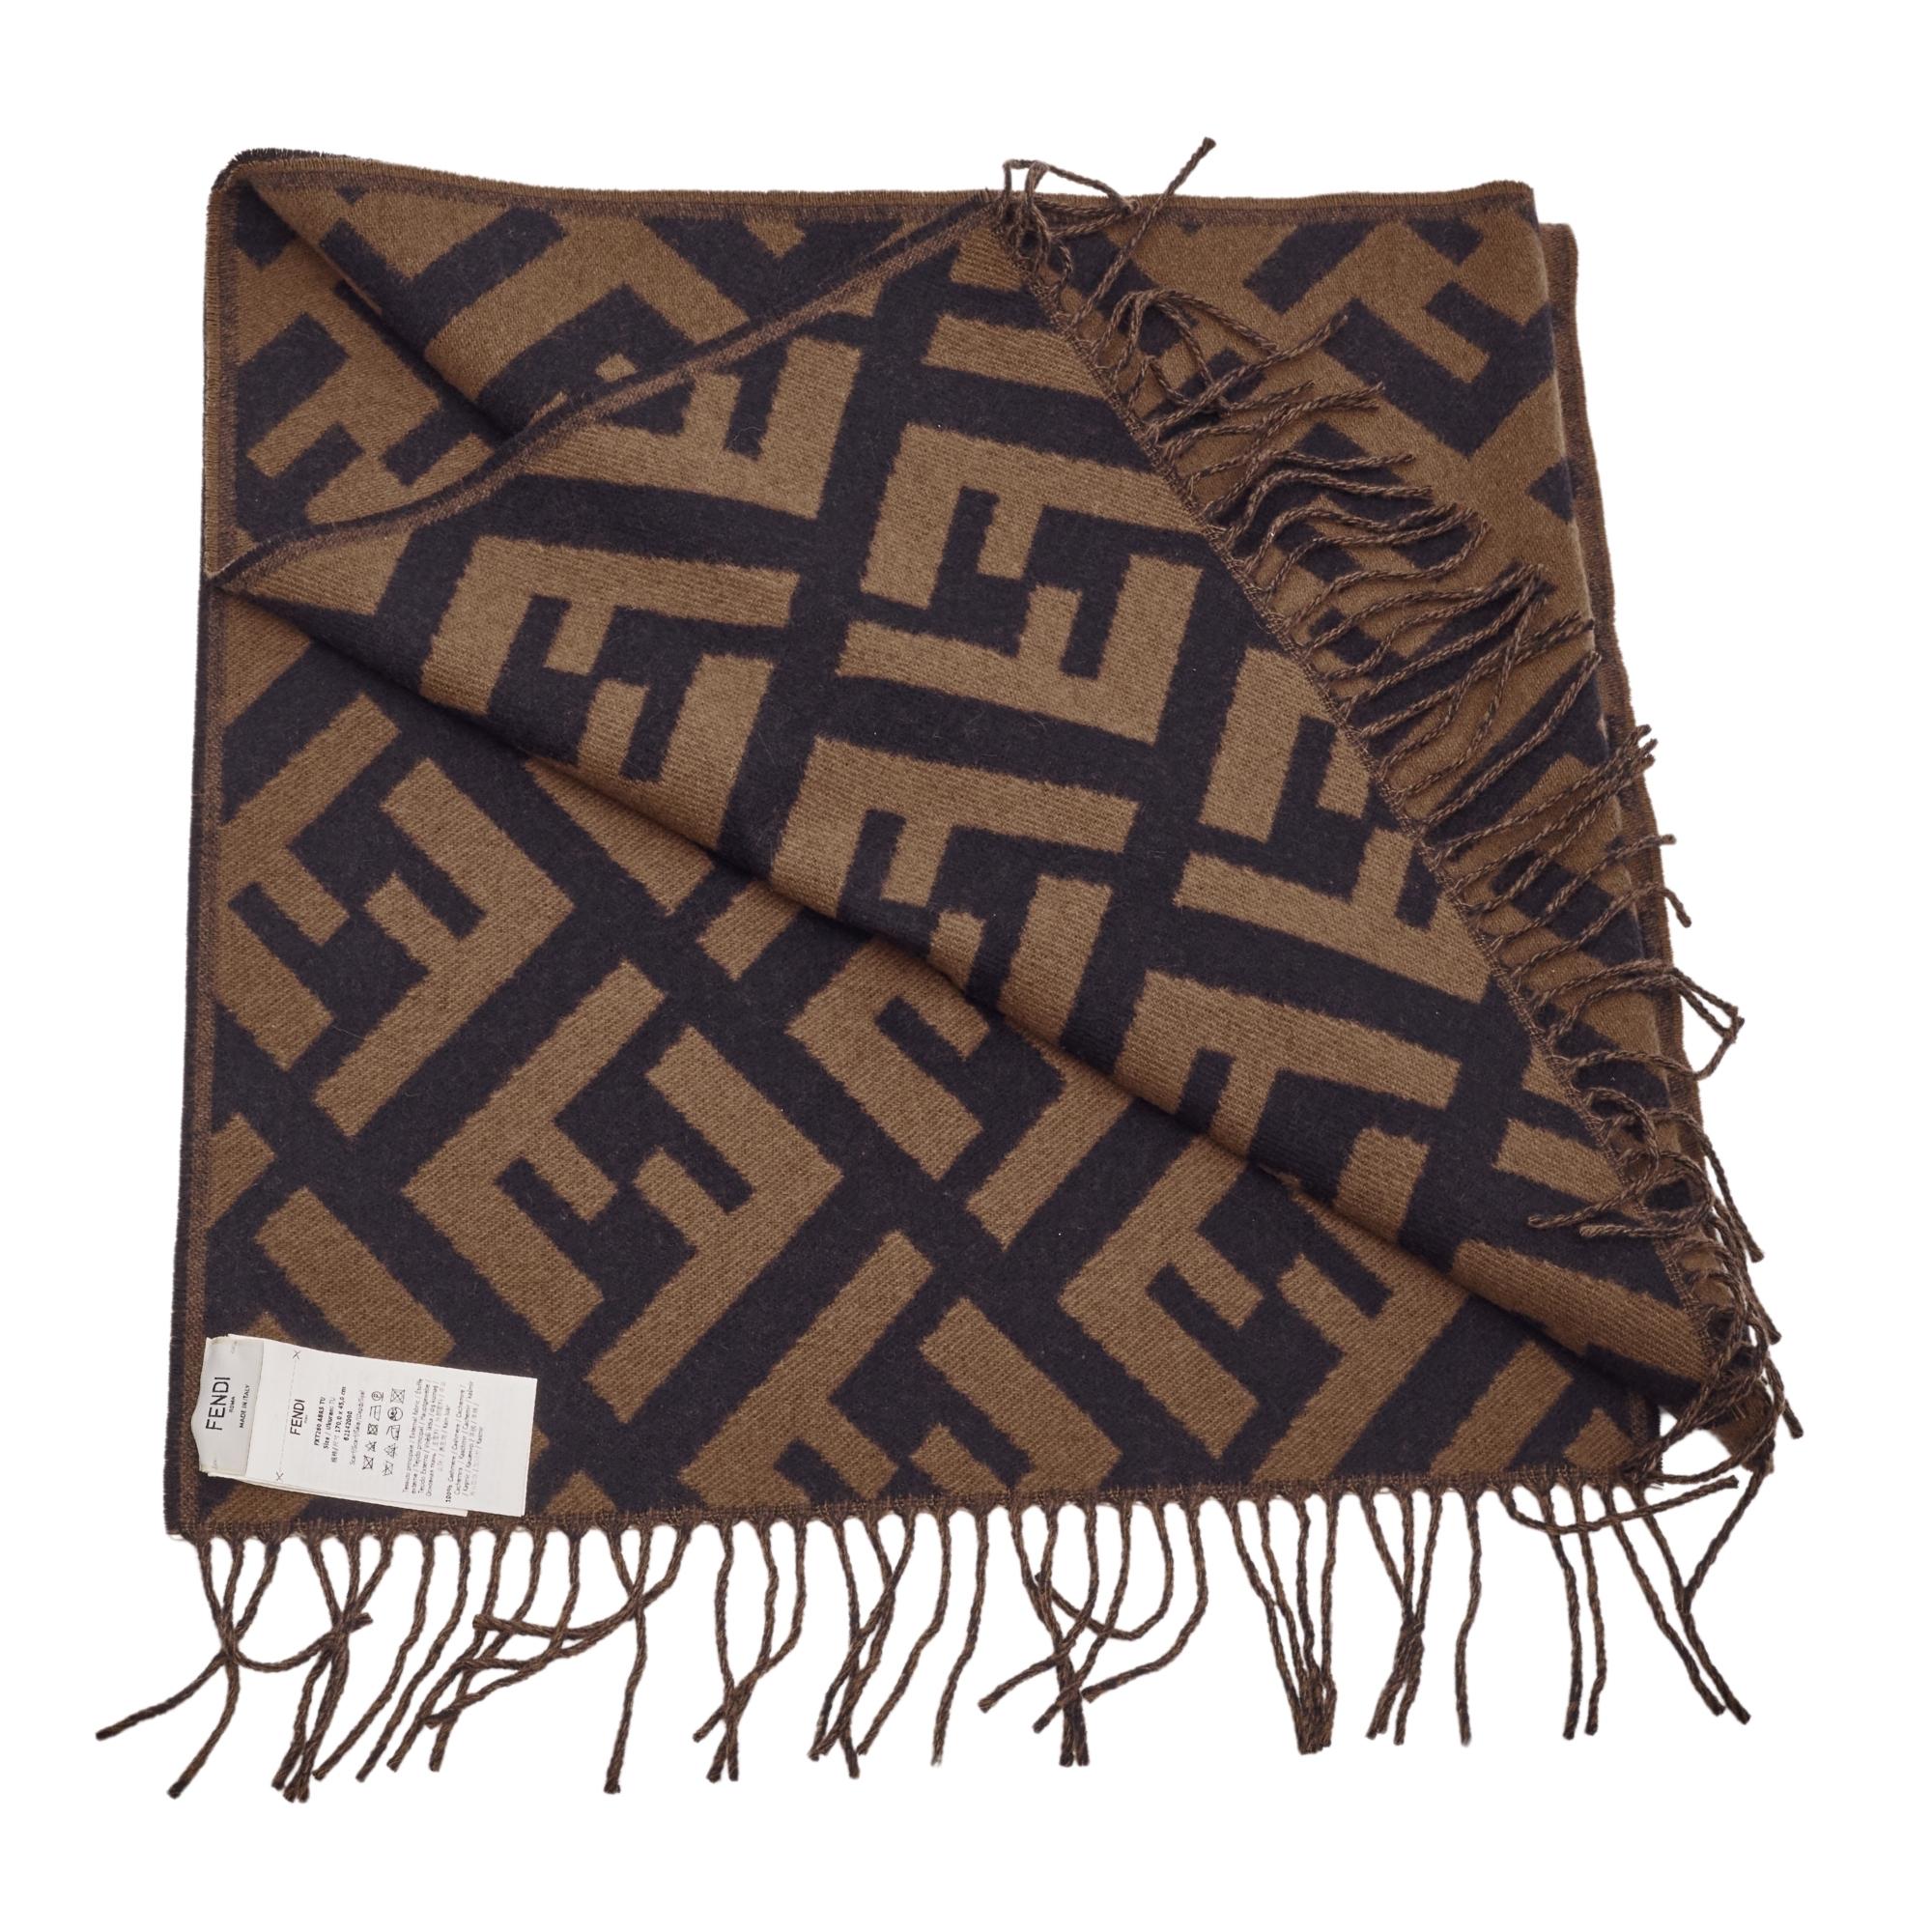 Fendi's scarf has been knitted in Italy from soft cashmere and features the house's iconic 'Zucca' logo. It first debuted in the '60s and is still incorporated into the latest collections. It's designed with fringed edges.

Color: tobacco brown with